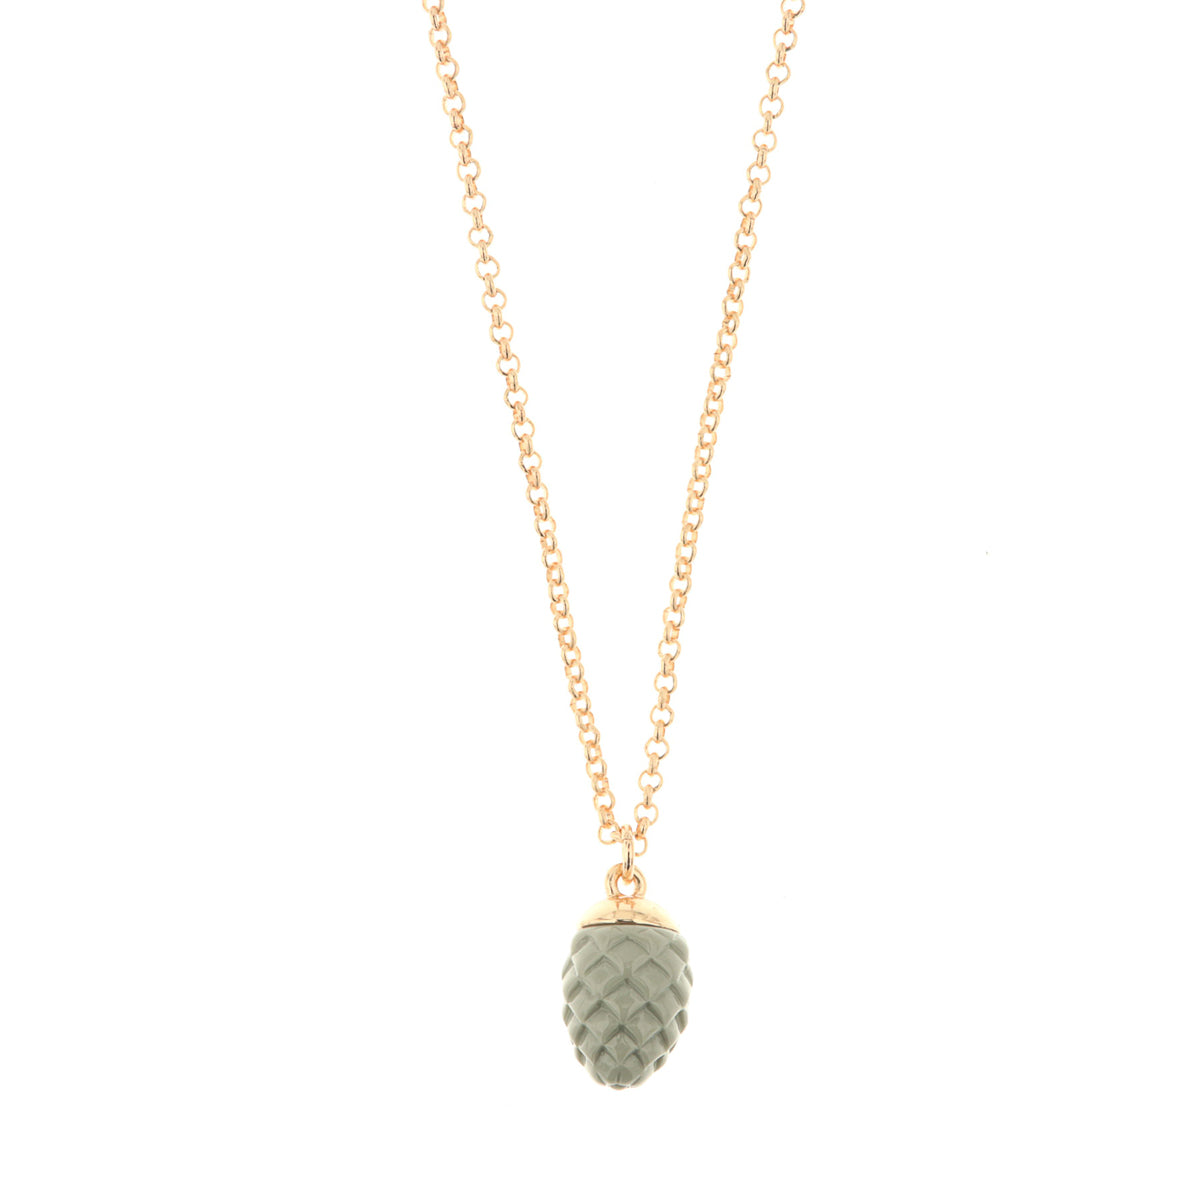 Metal necklace with gray enamel charming pine -shaped pendant